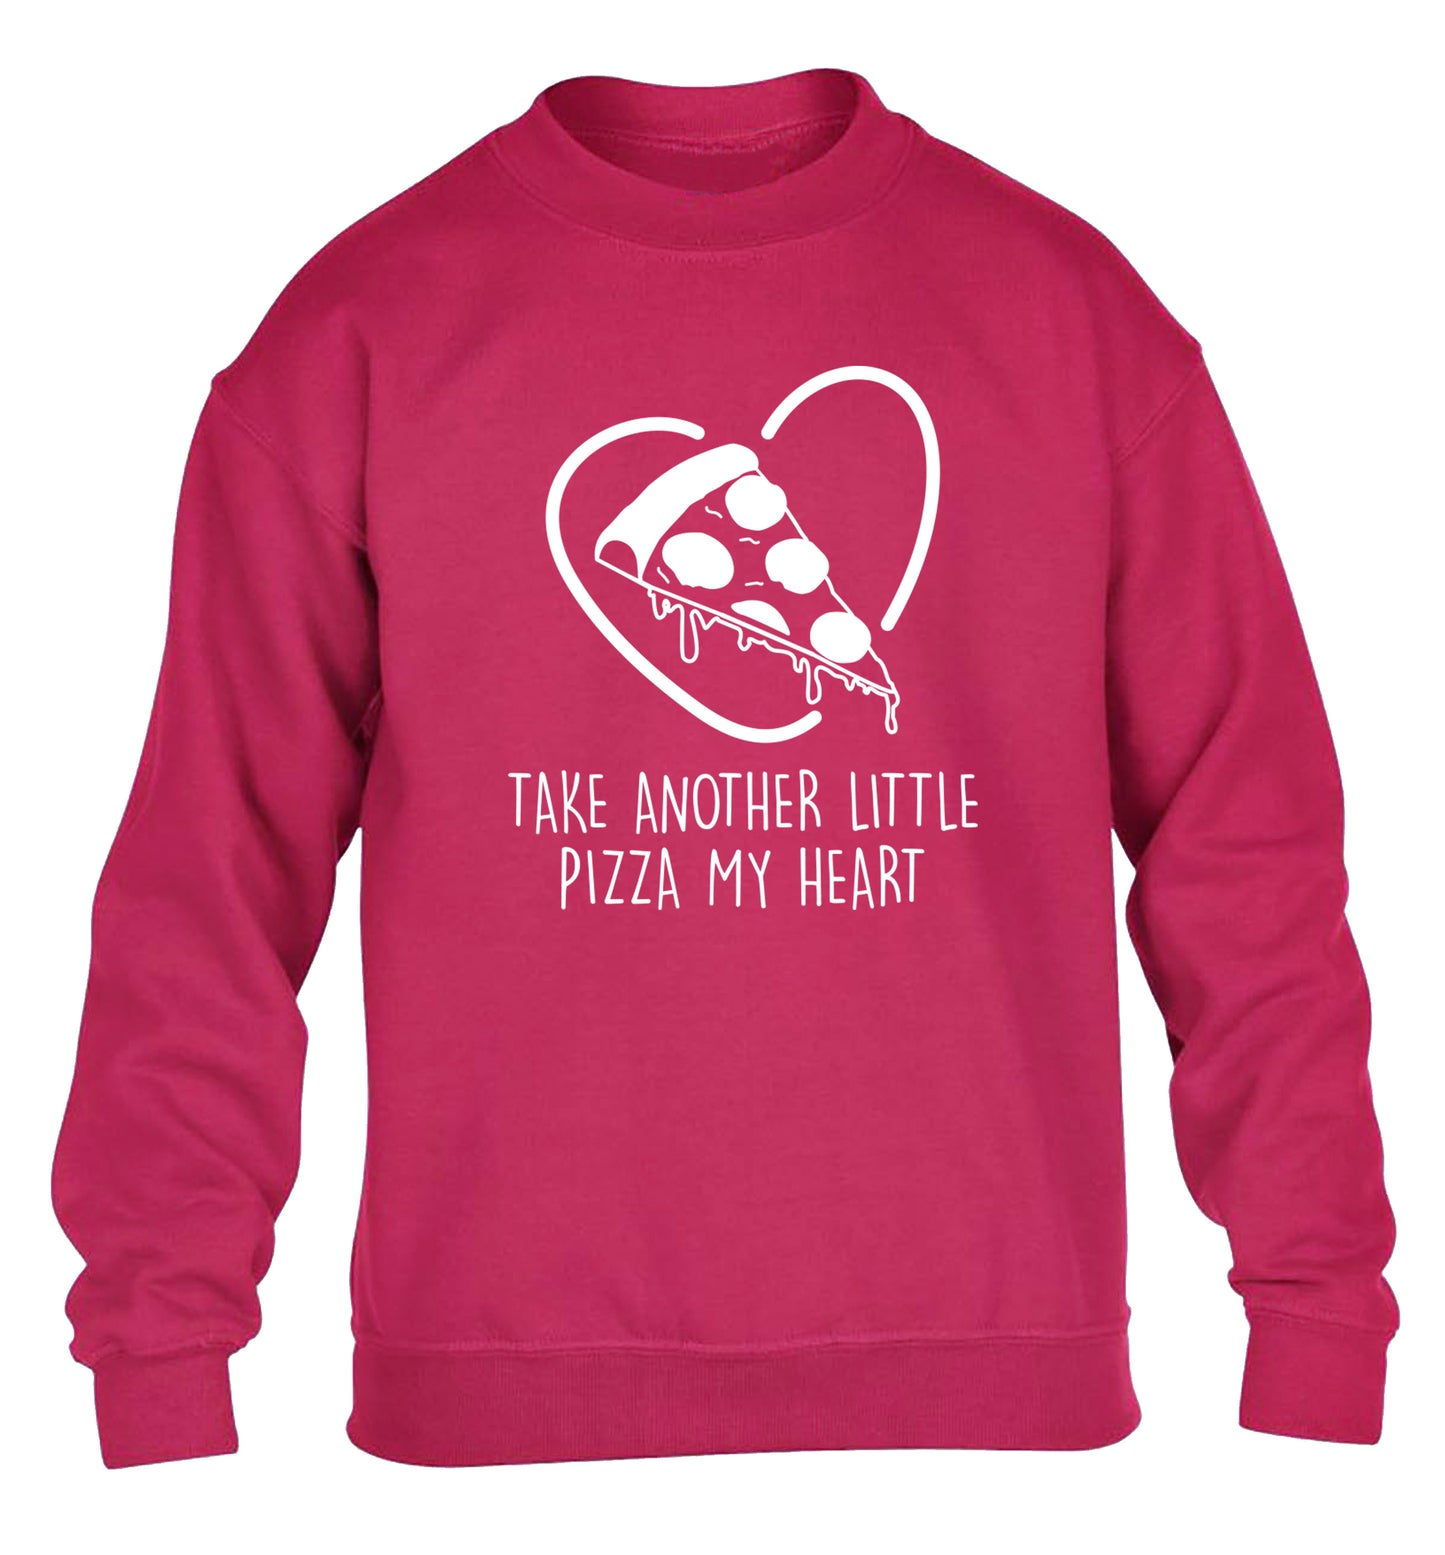 Take another little pizza my heart children's pink sweater 12-13 Years